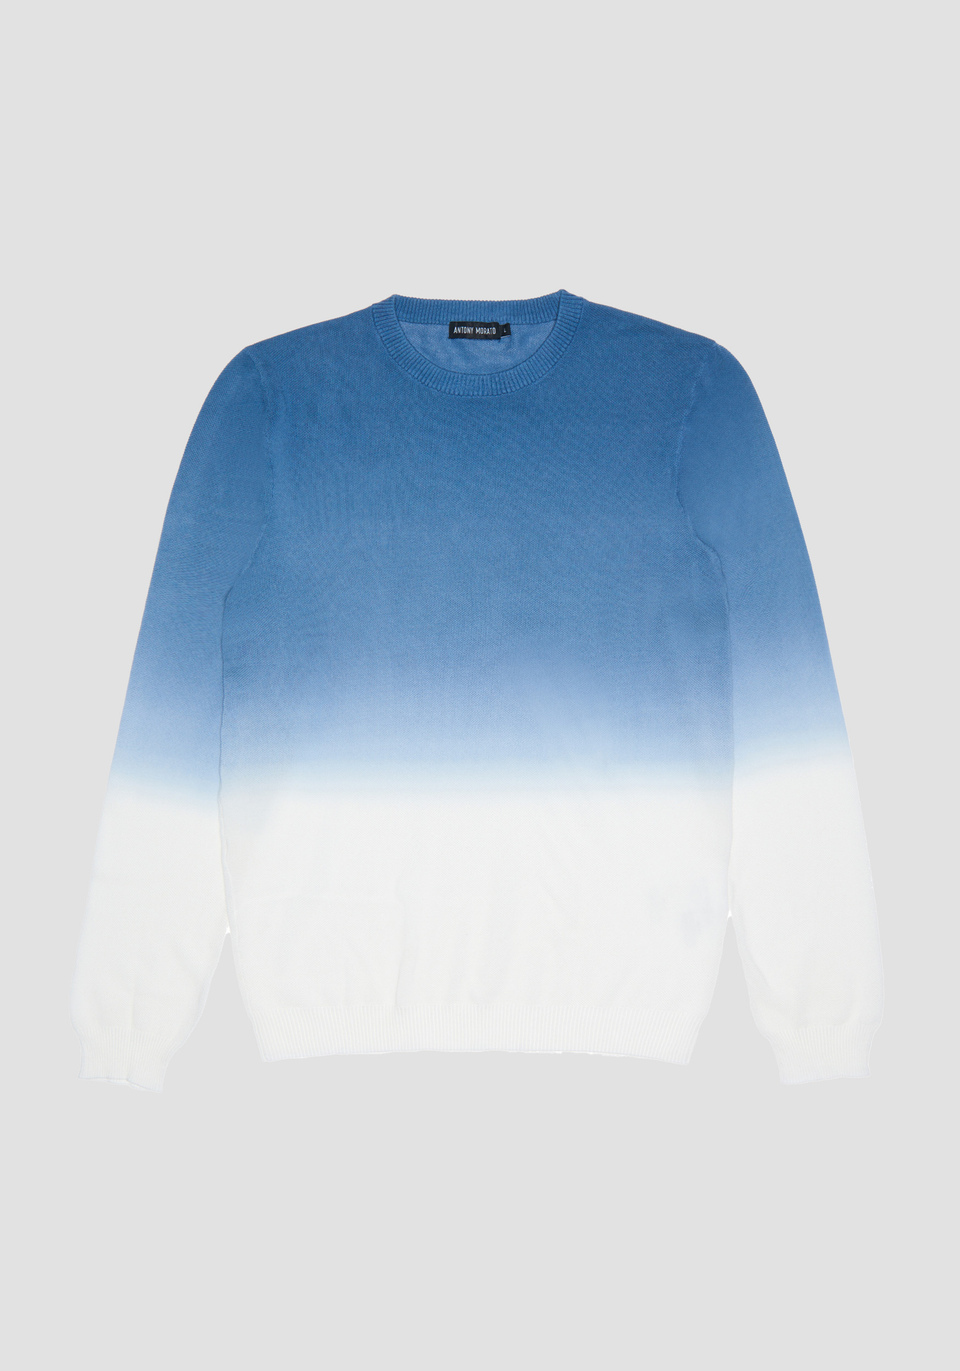 SLIM-FIT JUMPER IN PURE COTTON WITH TIE-DYE EFFECT - Antony Morato Online Shop